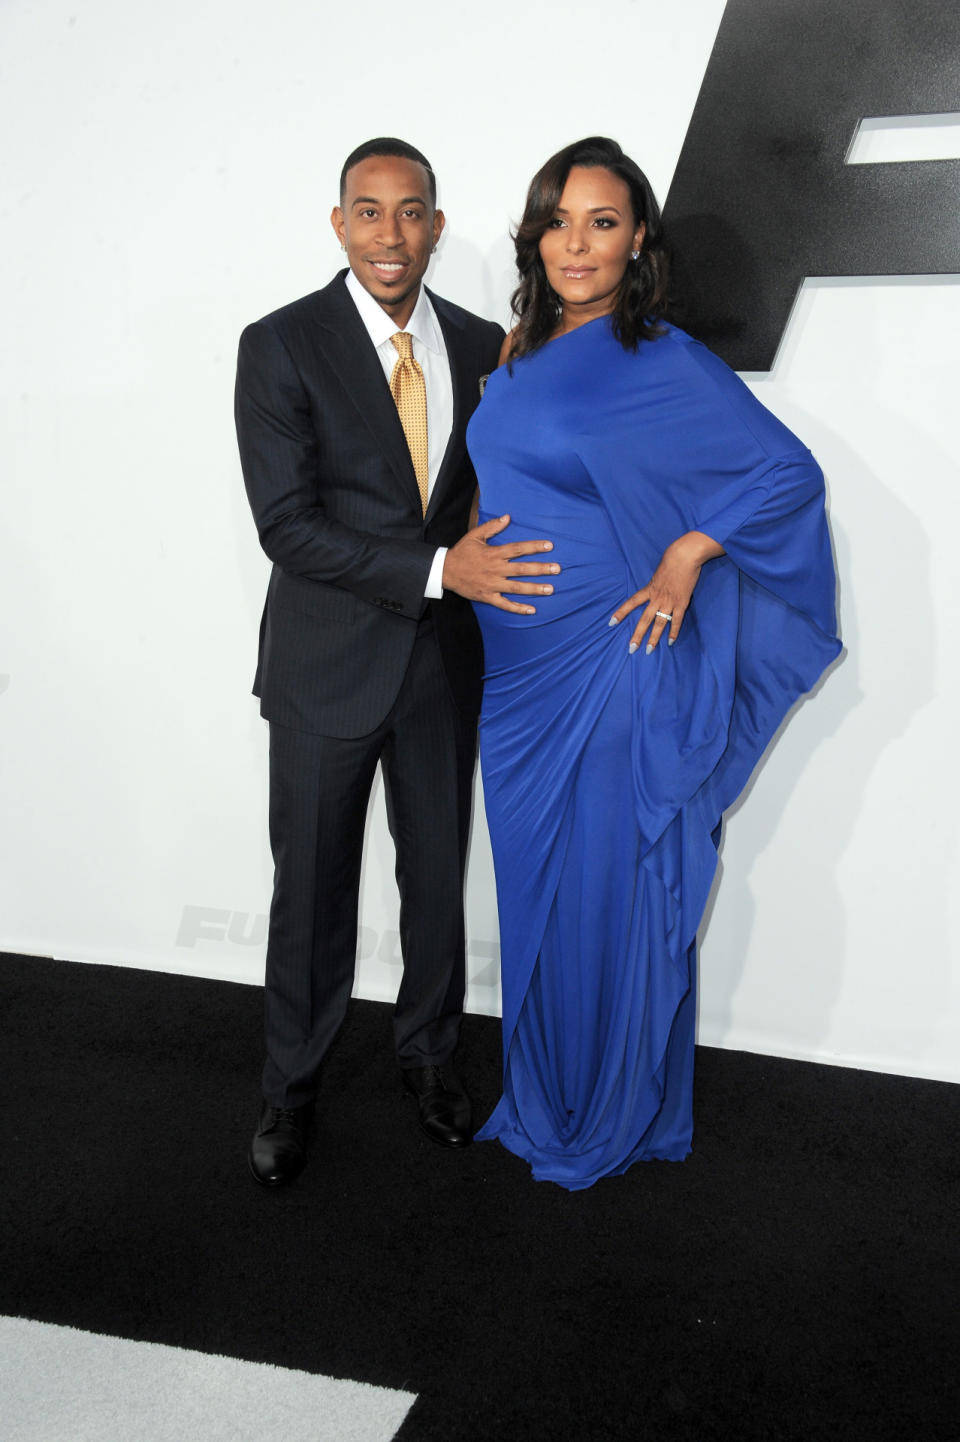 Ludacris, the King of Instagram and “Furious 7” actor, showed his star power off with a gold tie. His fiancé, Eudoxie Mbouguiengue, dressed her baby bump well in a royal blue draped gown, accessorized with the rapper’s constant hand presence.